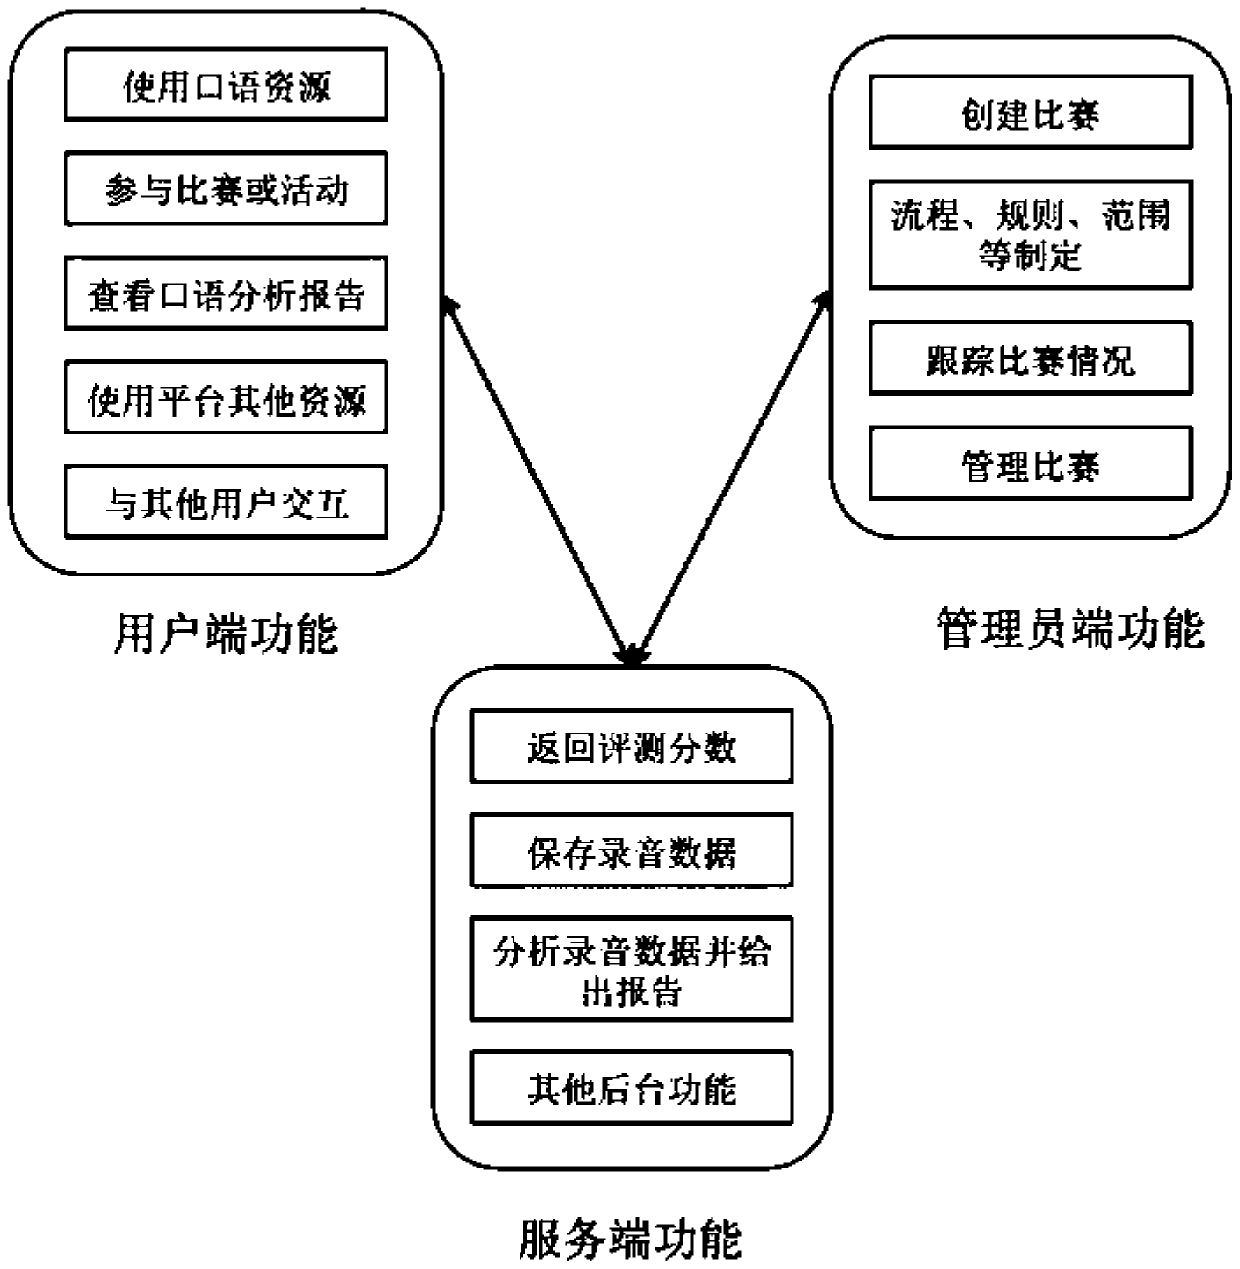 English learning system and method based on electronic resource library